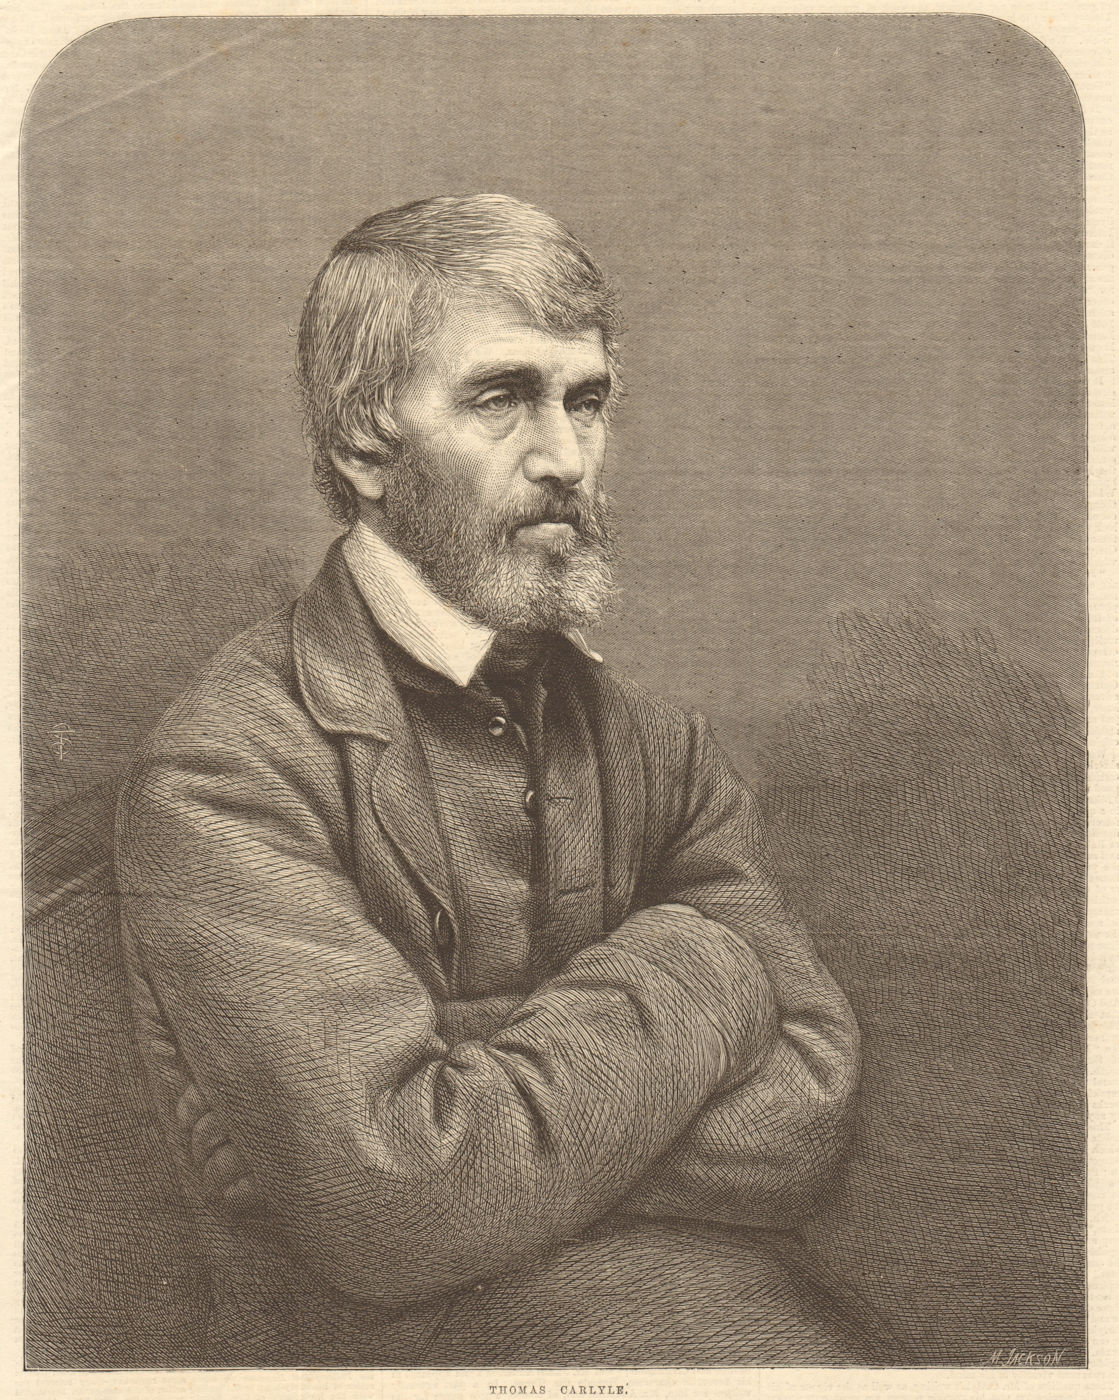 Associate Product Thomas Carlyle. Authors. Scotland 1864 antique ILN full page print